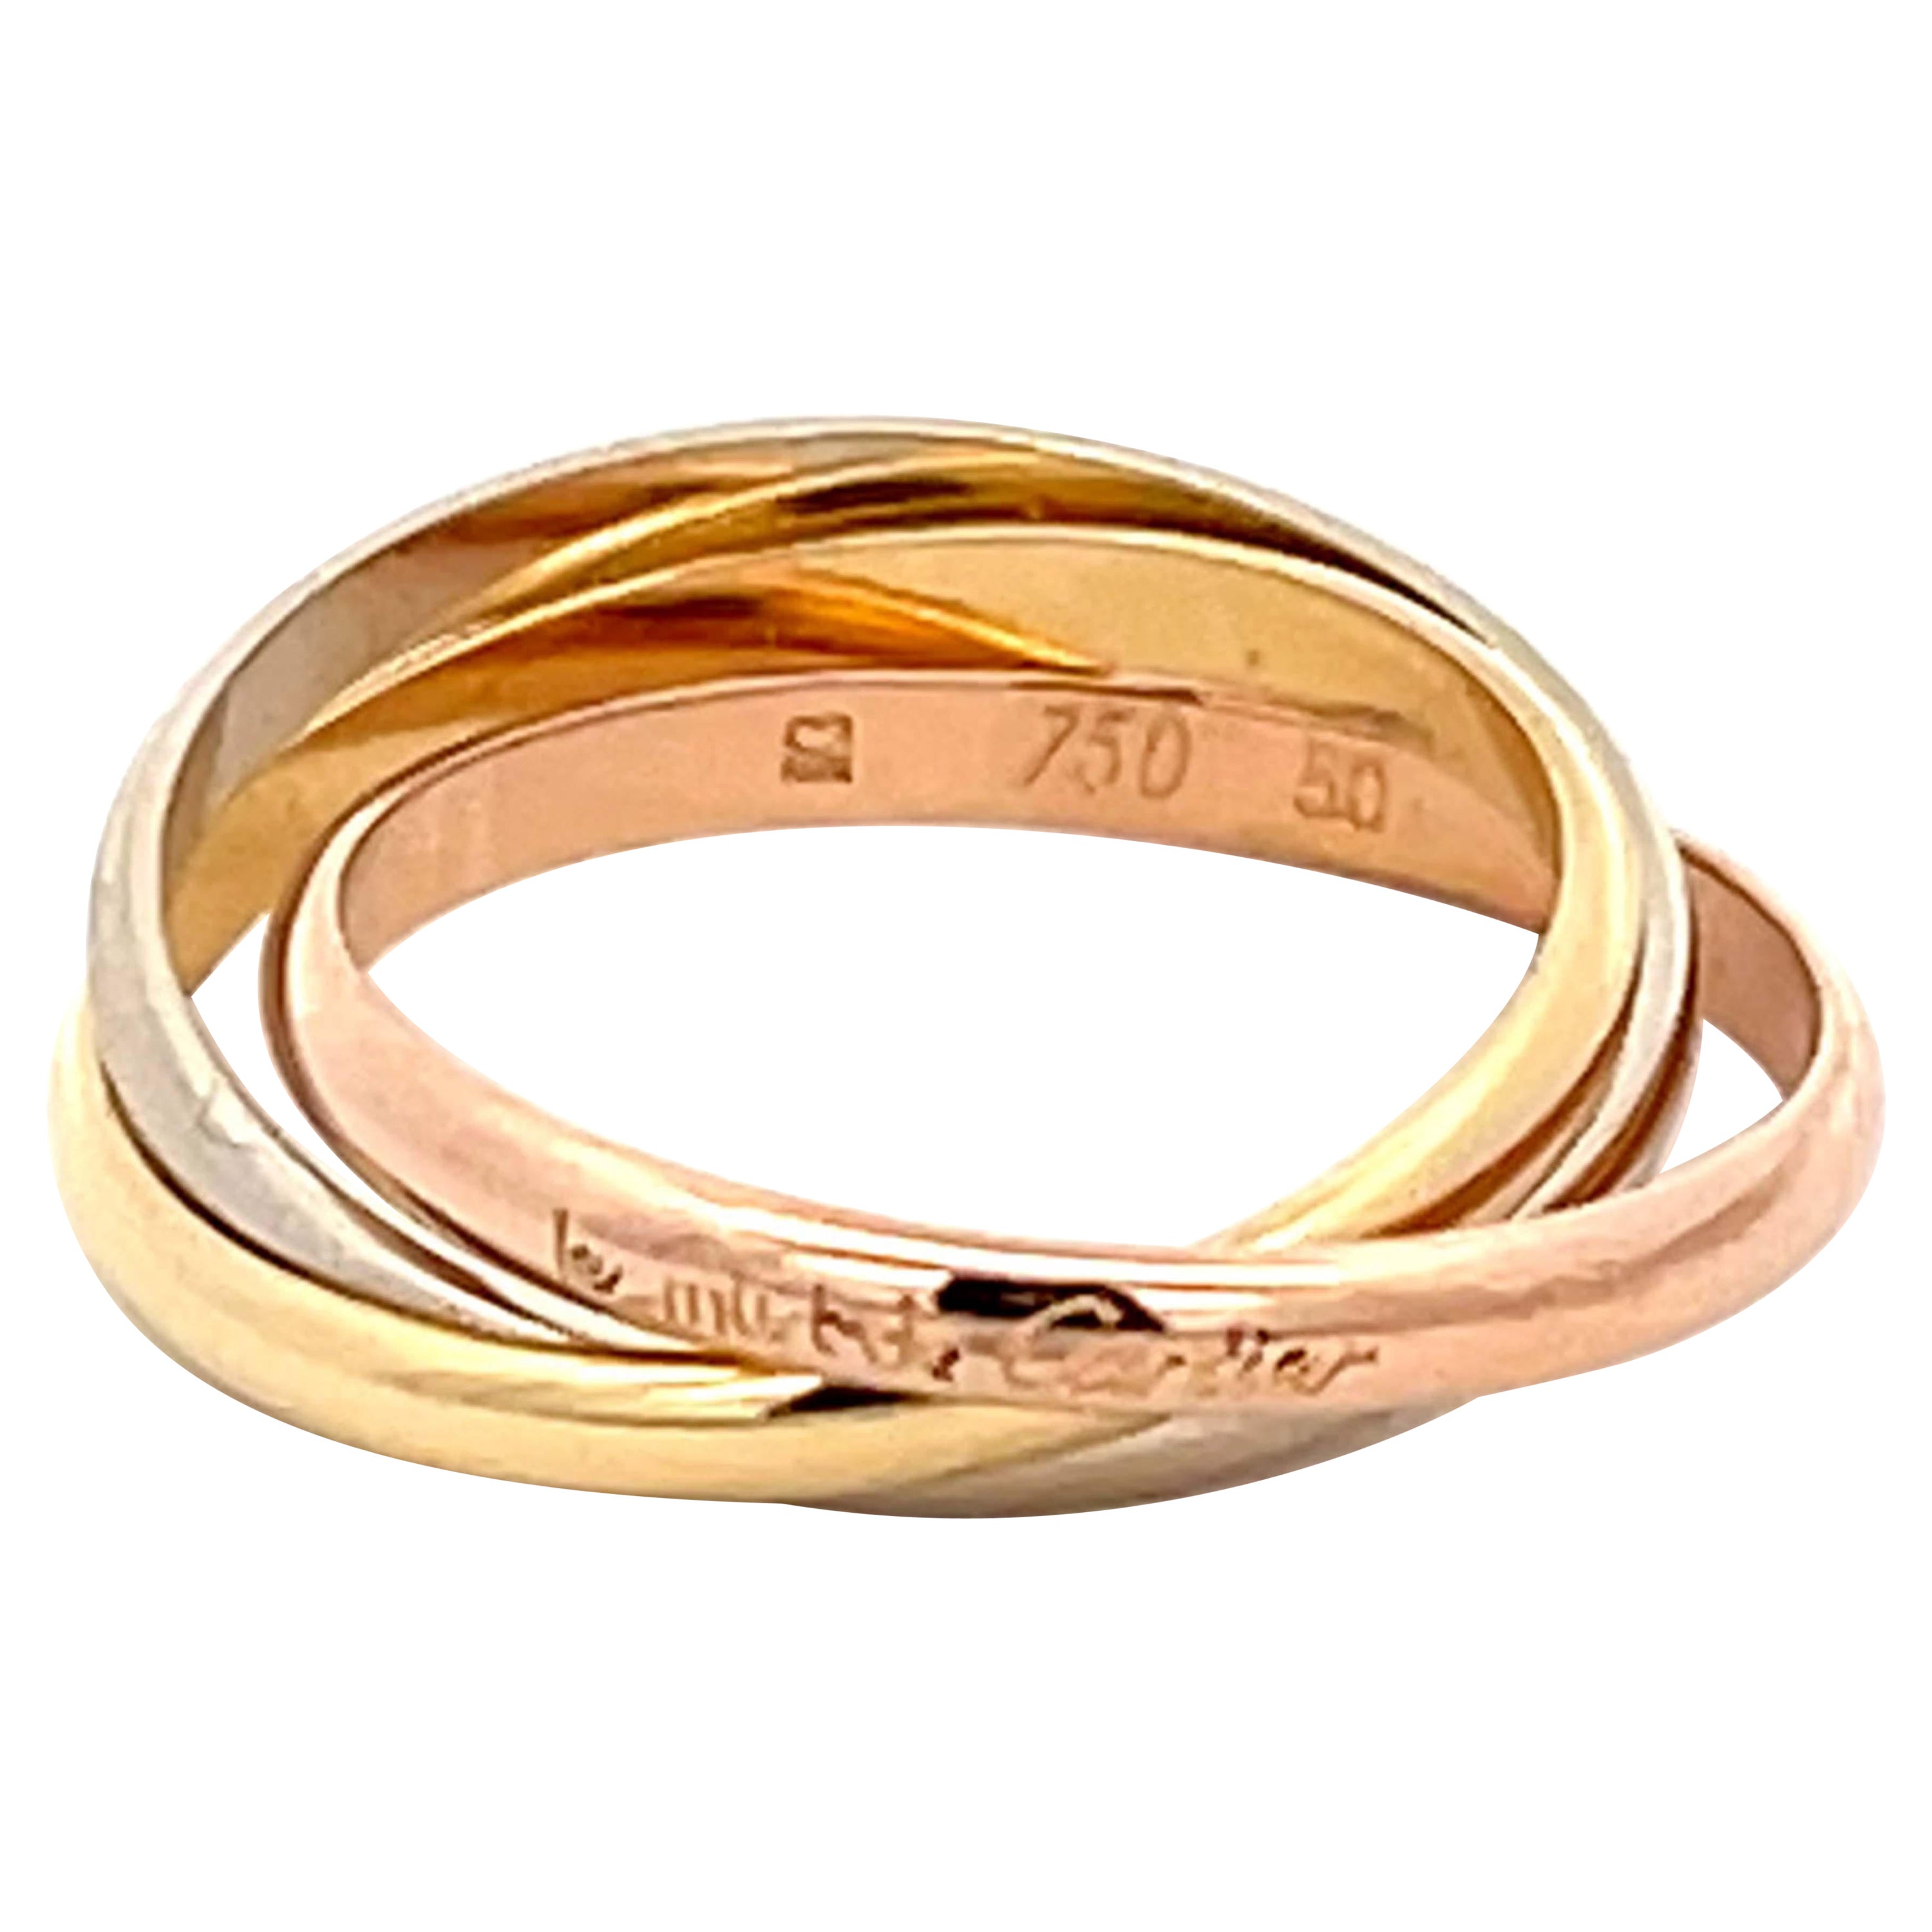 Cartier Trinity Ring in 18k Gold